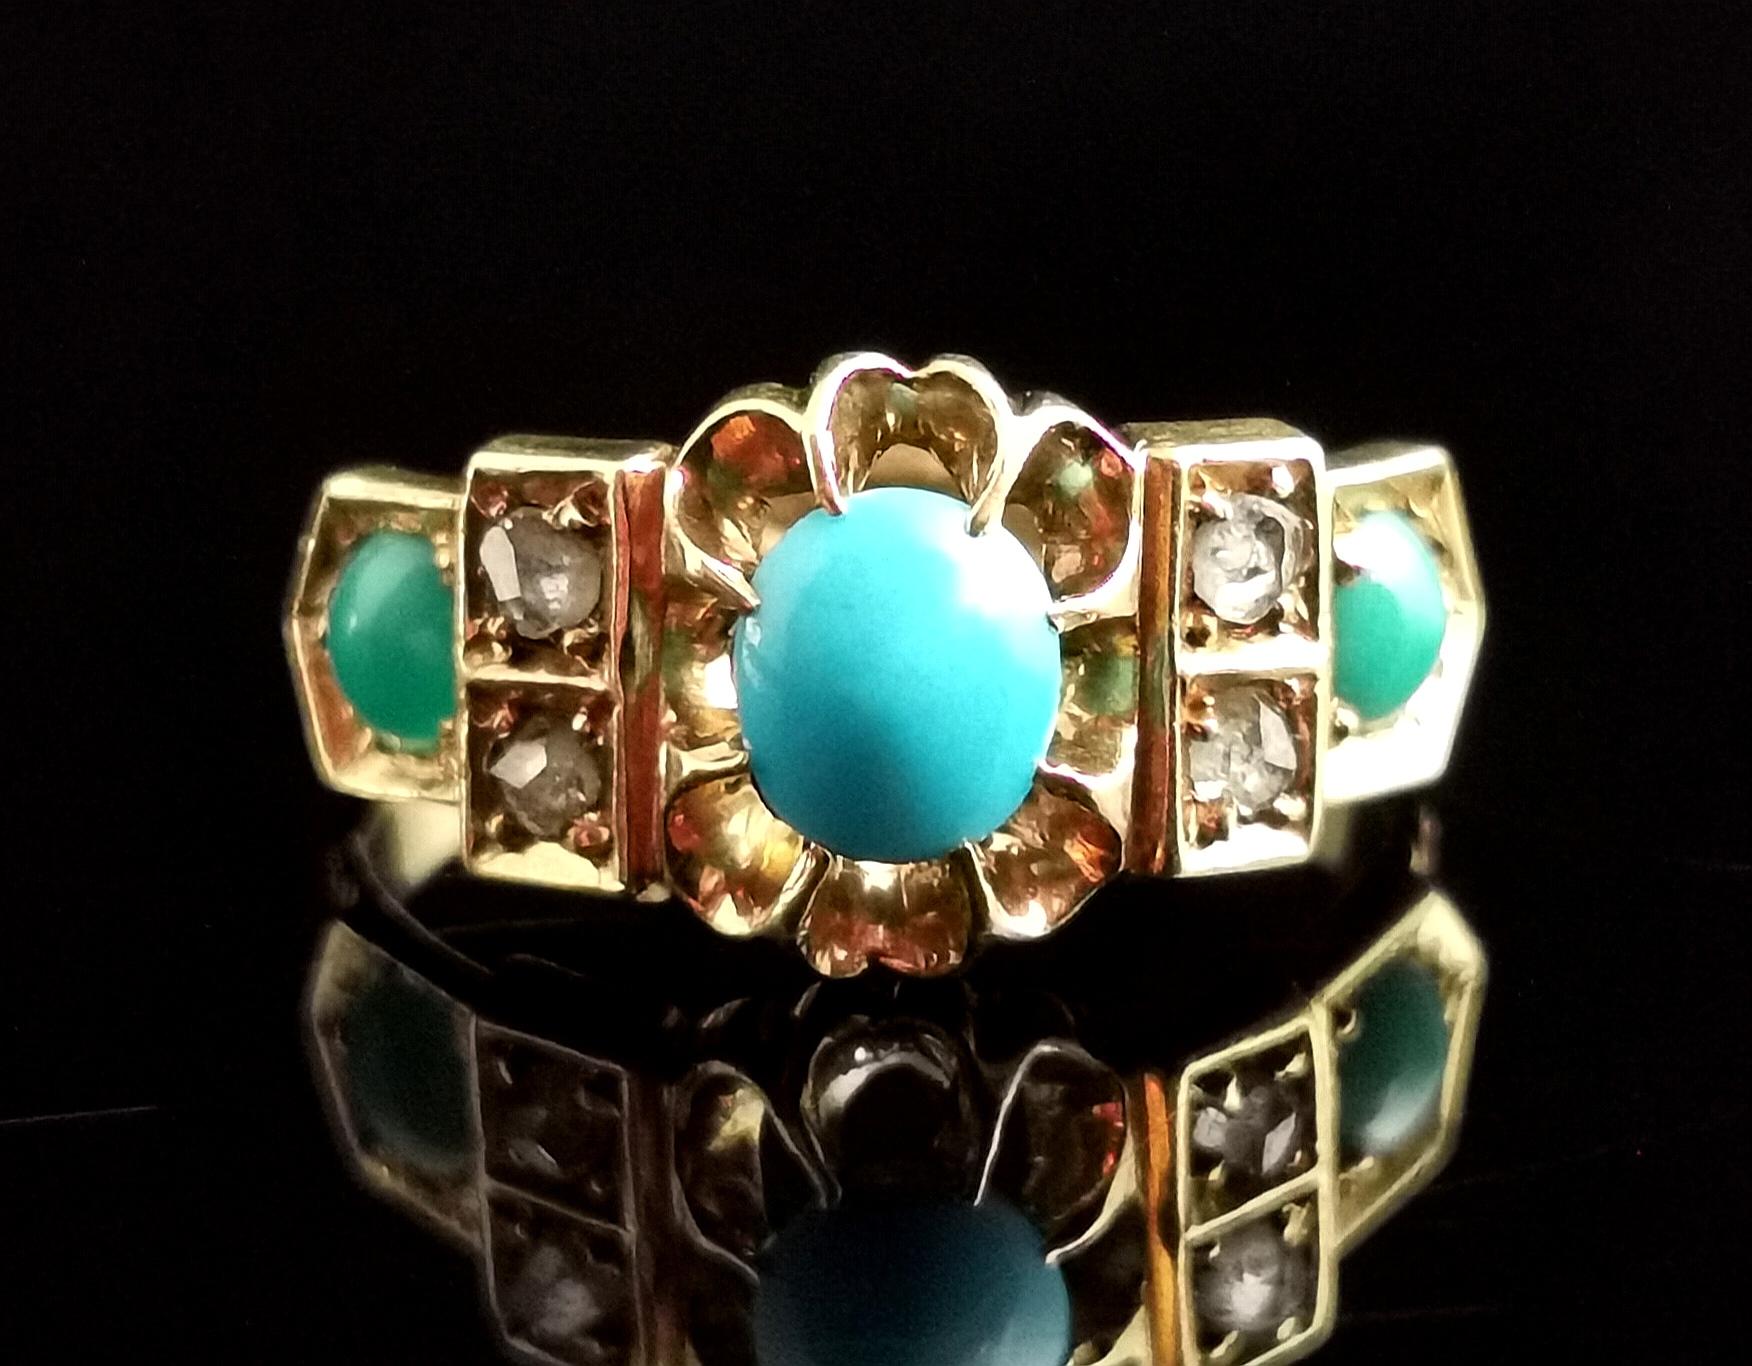 A truly beautiful antique, early 20th century Turquoise and diamond ring in 18kt yellow gold.

This ring has an unusual design and is truly a perfect combination of turquoise and diamond.

It is set in rich 18kt gold with stepped and engraved